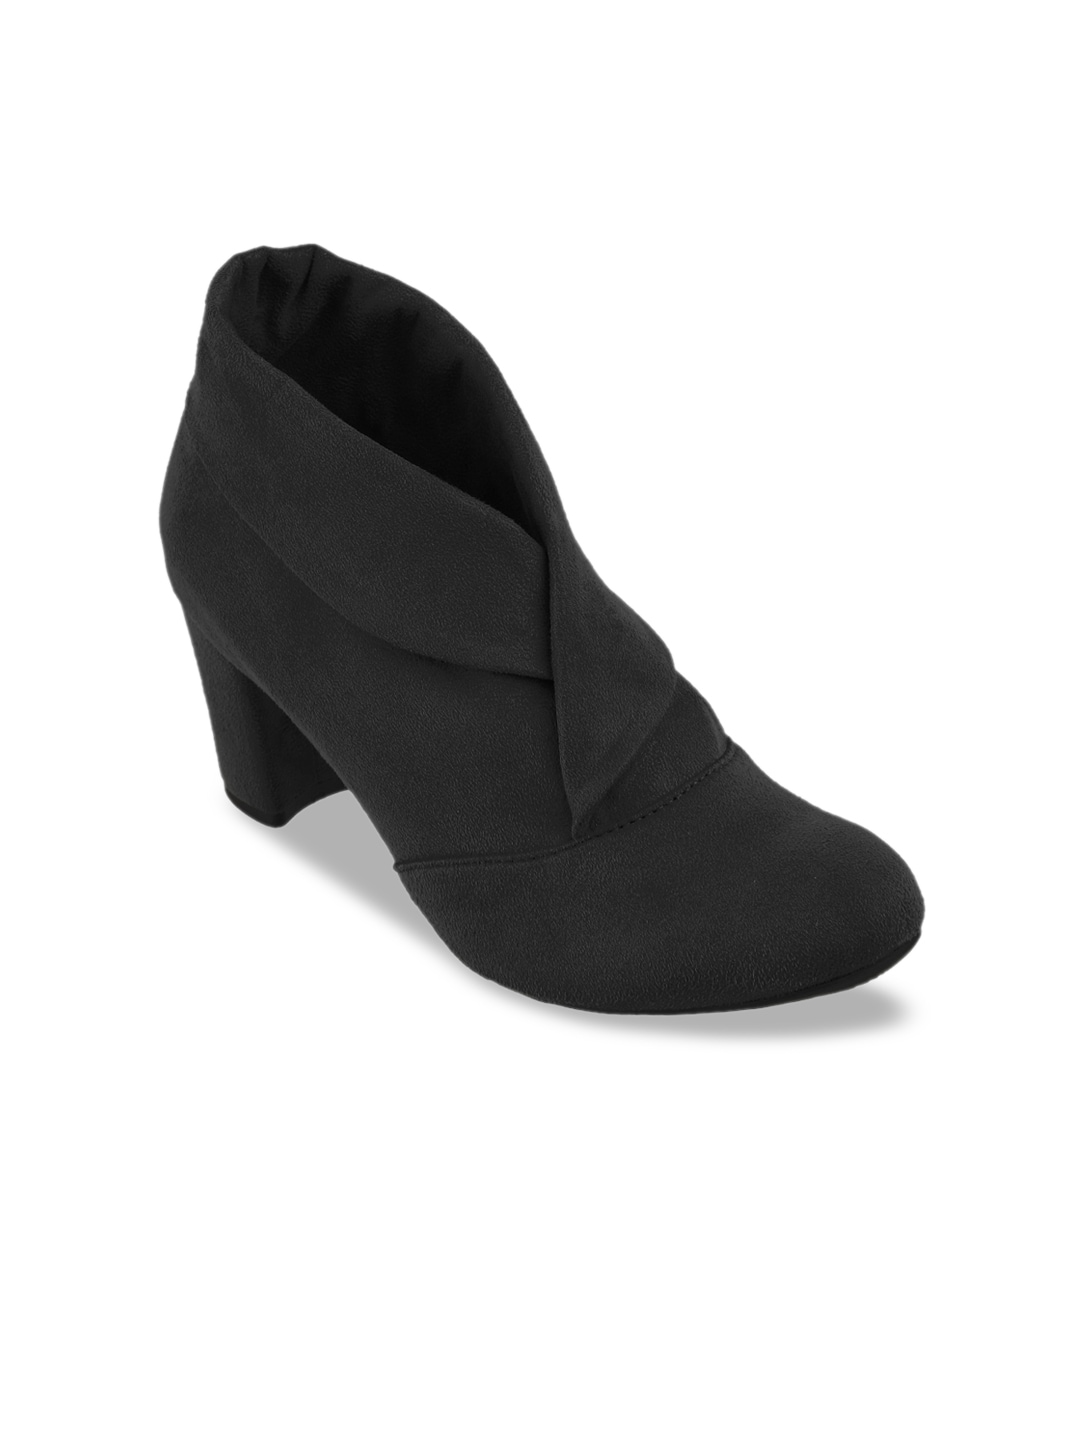 LEMON & PEPPER Women Black Solid Heeled Boots Price in India